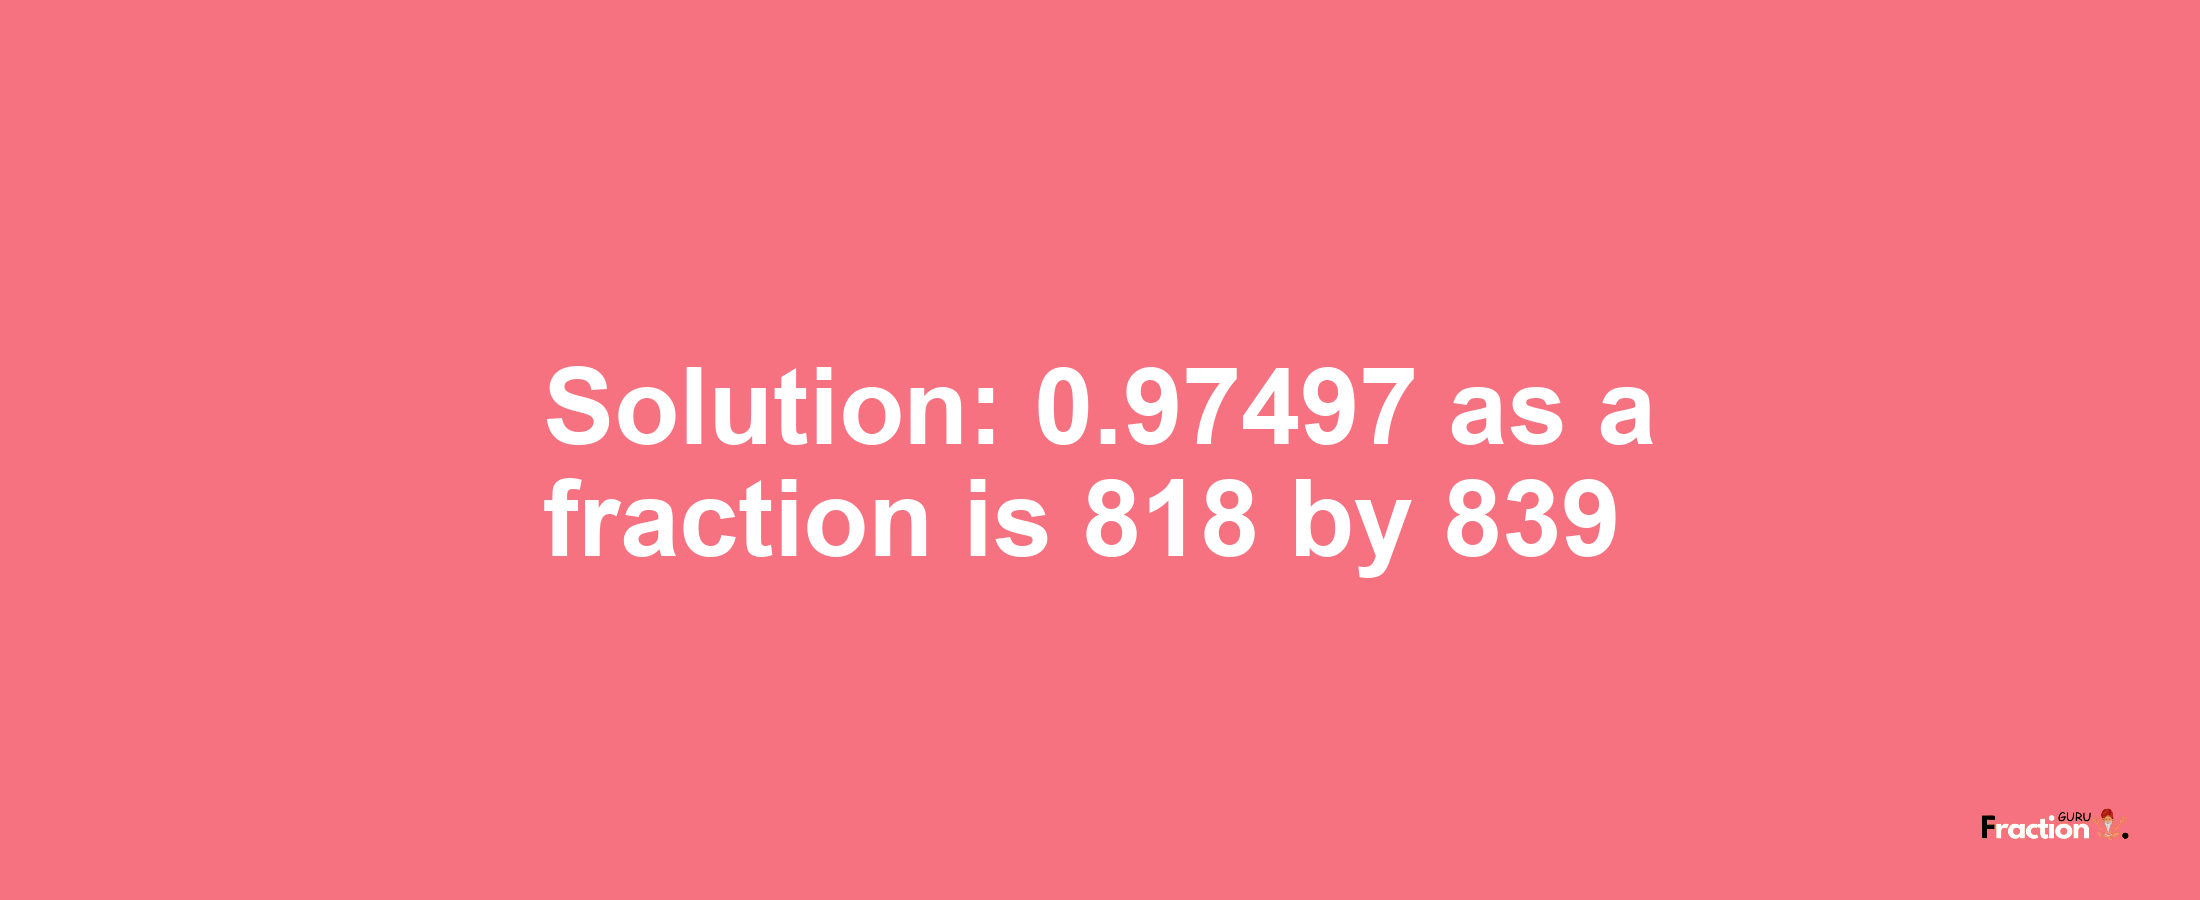 Solution:0.97497 as a fraction is 818/839